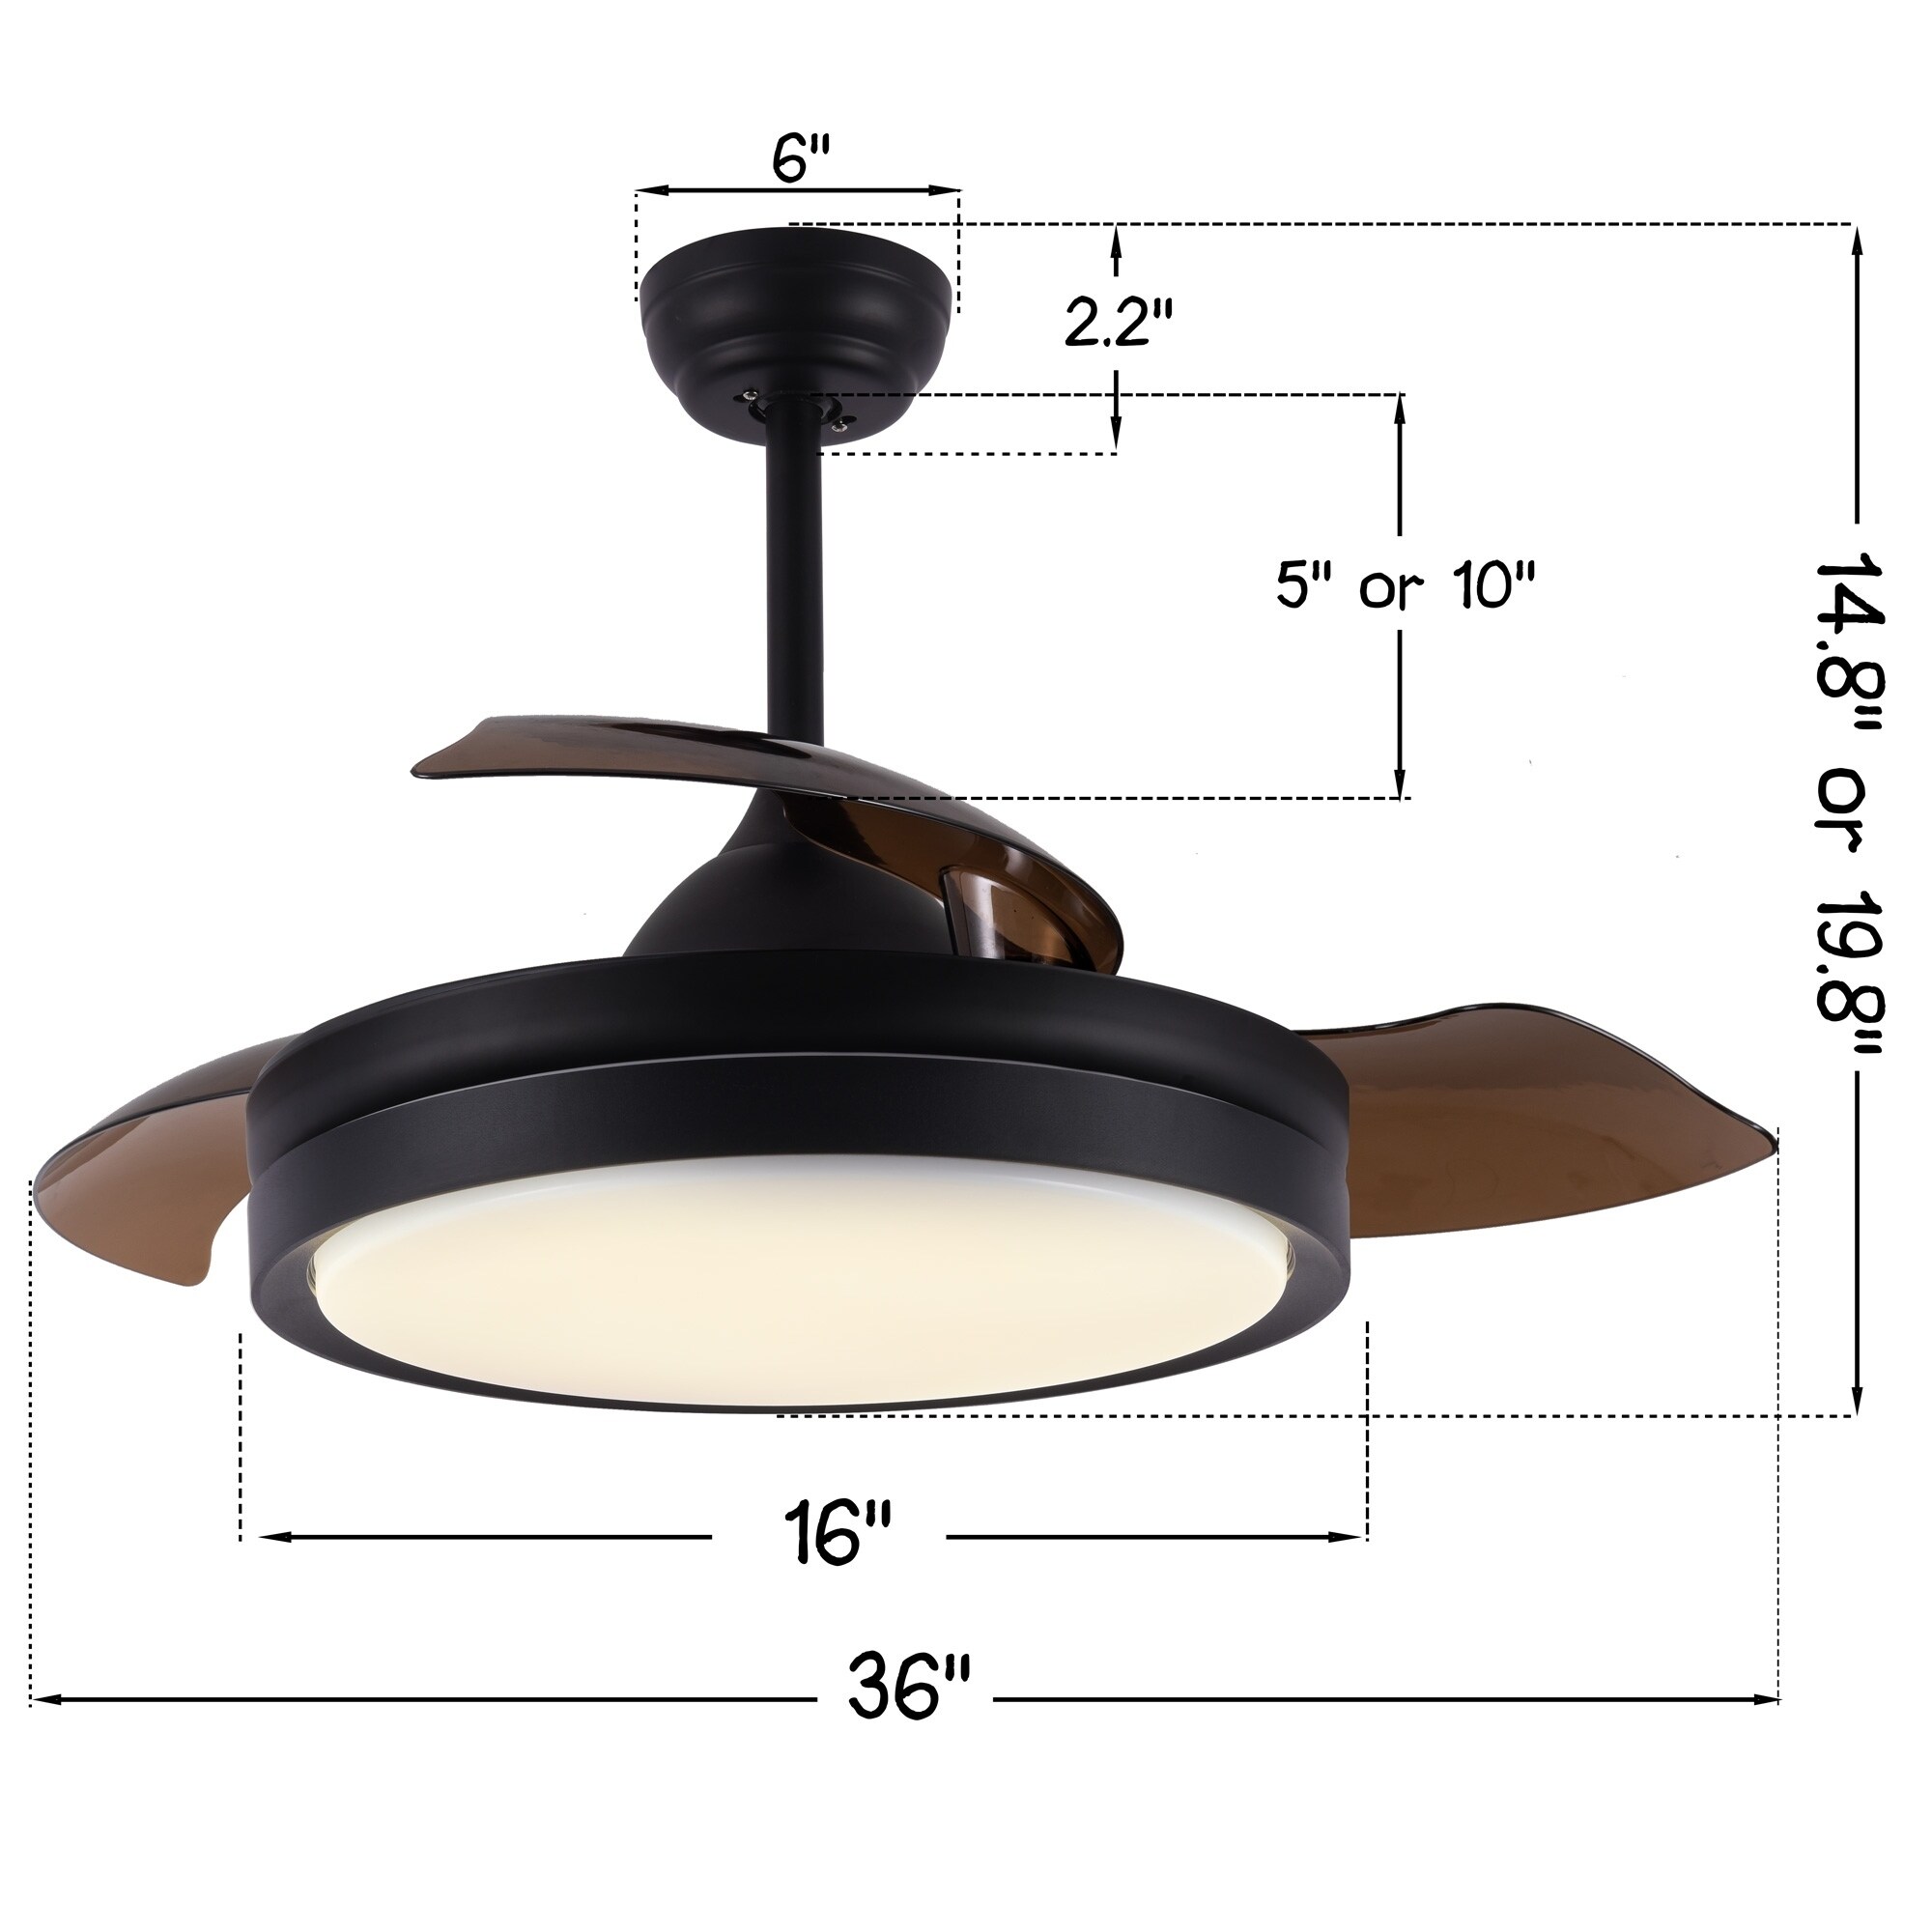 36 Dimmable Retractable Ceiling Fan With Led Light Remote 36 On Sale Overstock 28487399 Brushed Nickel